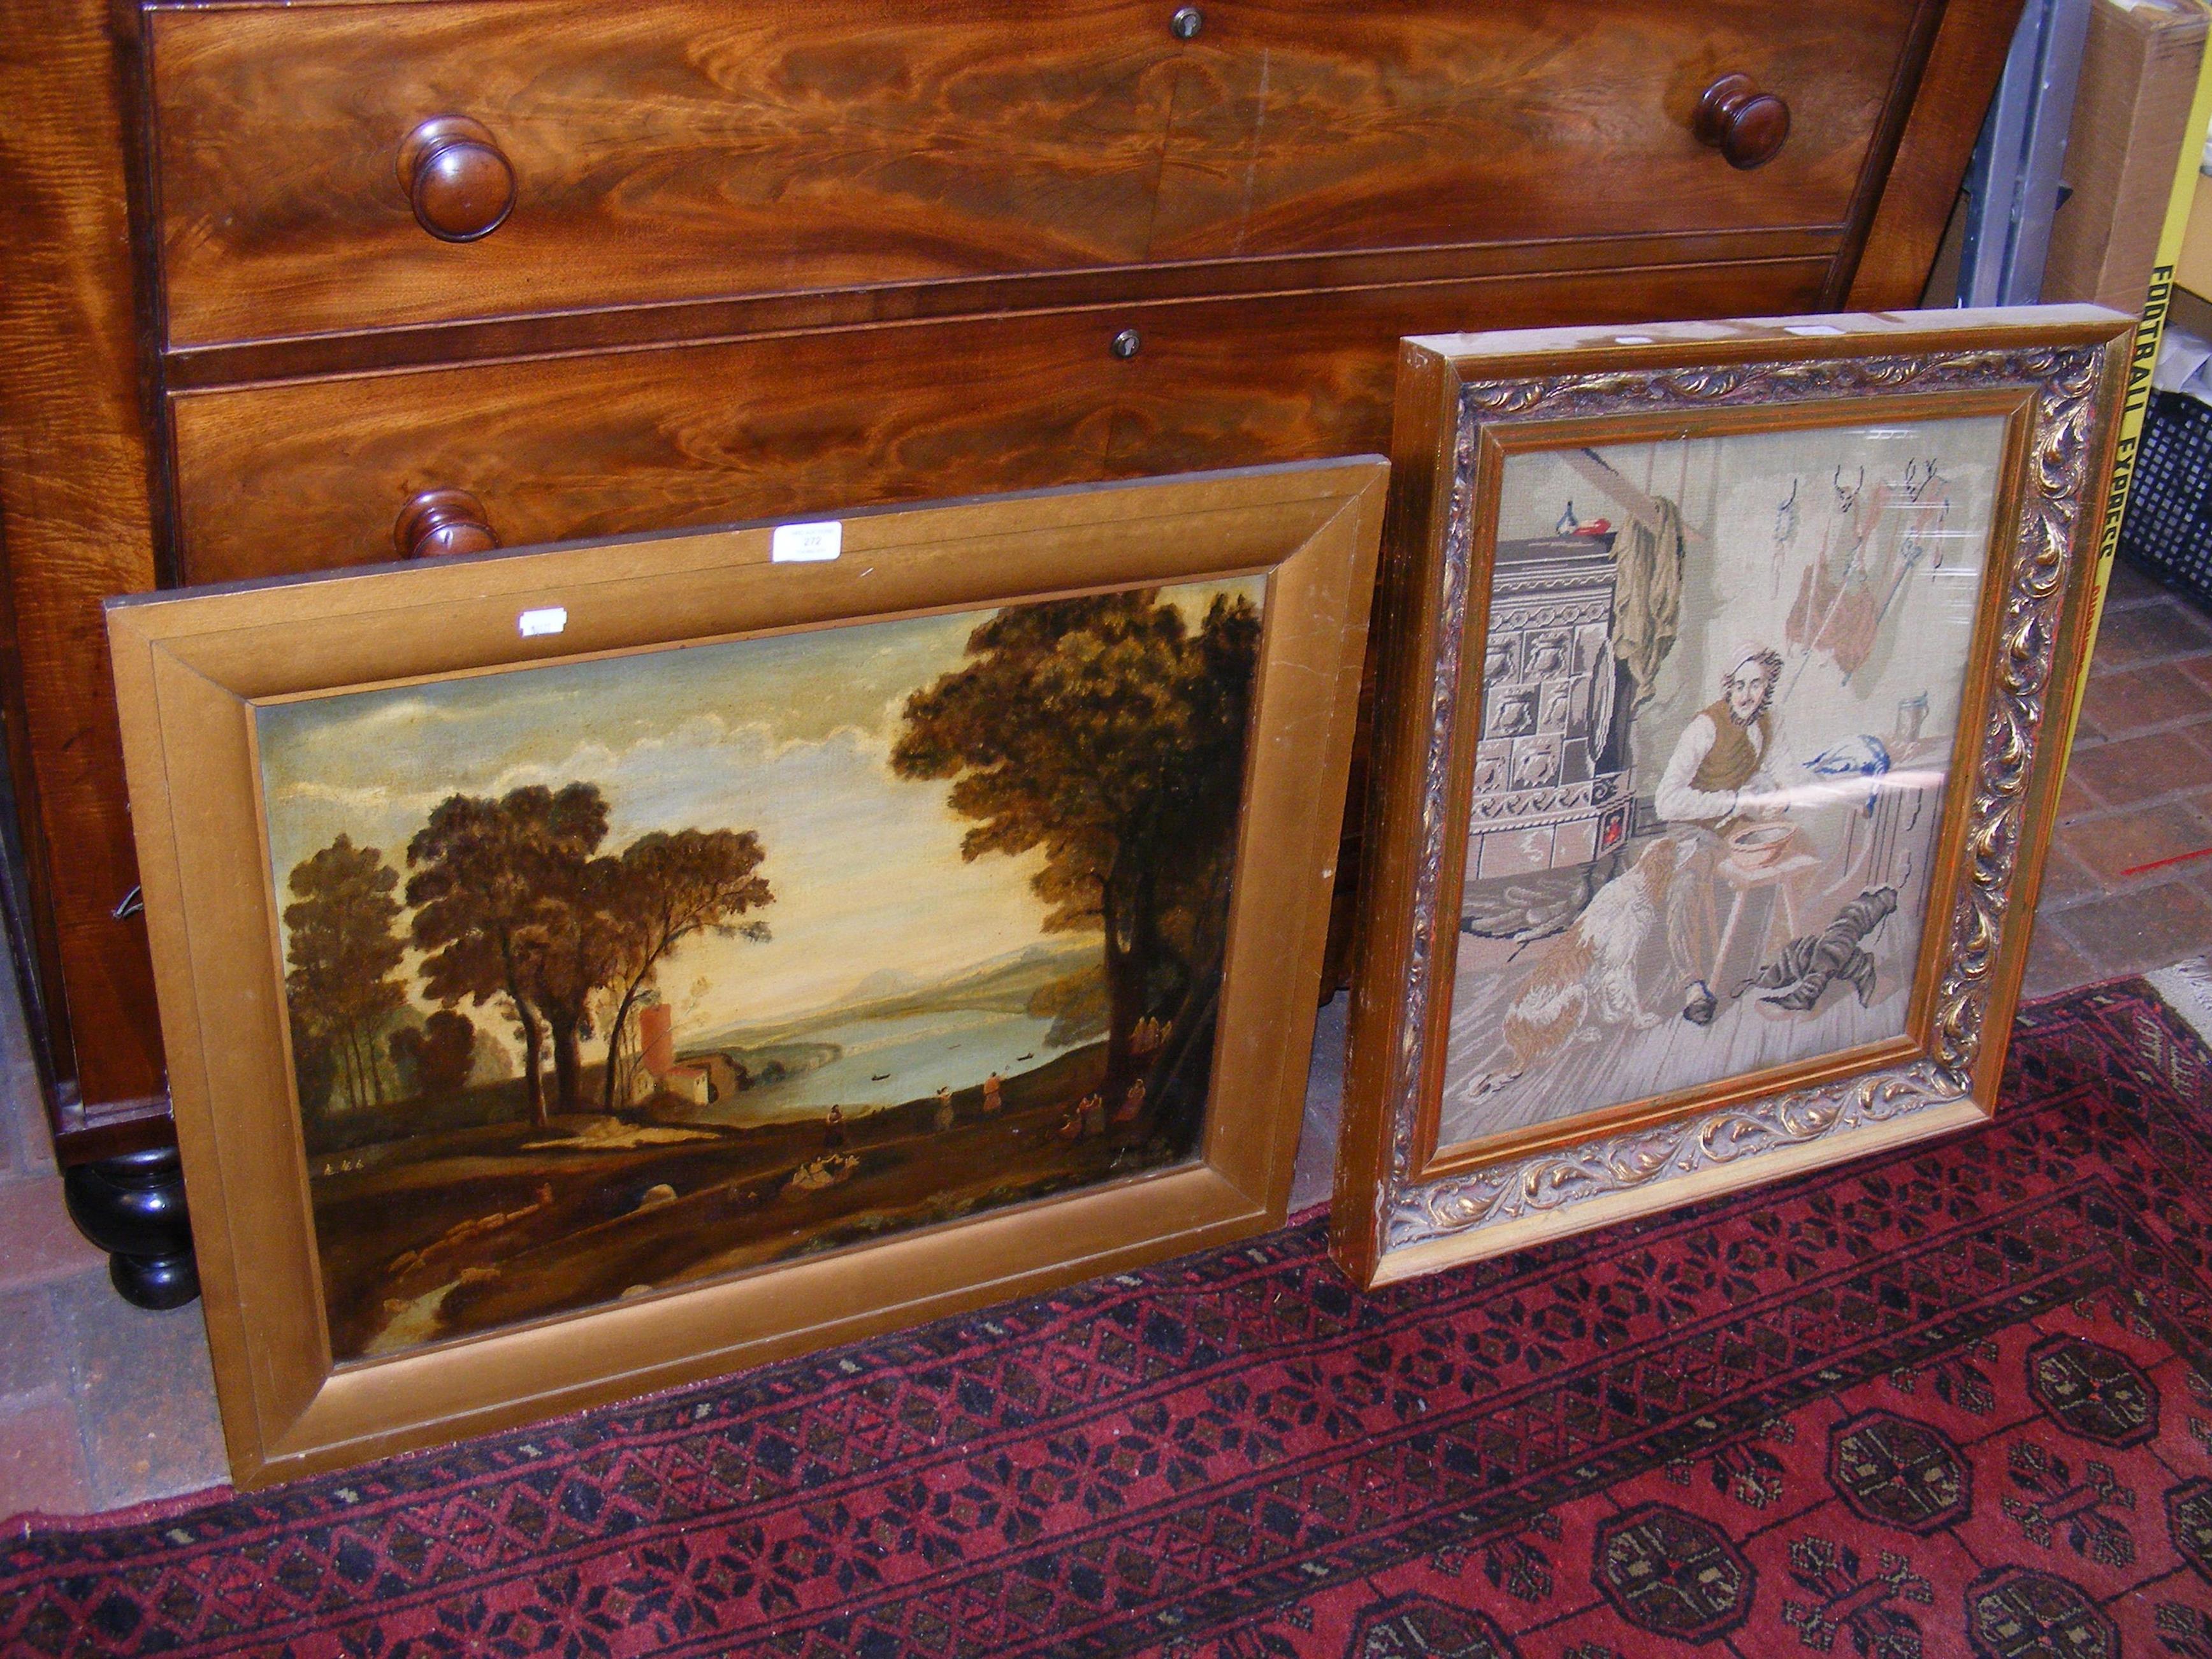 An antique oil painting of estuary scene, together